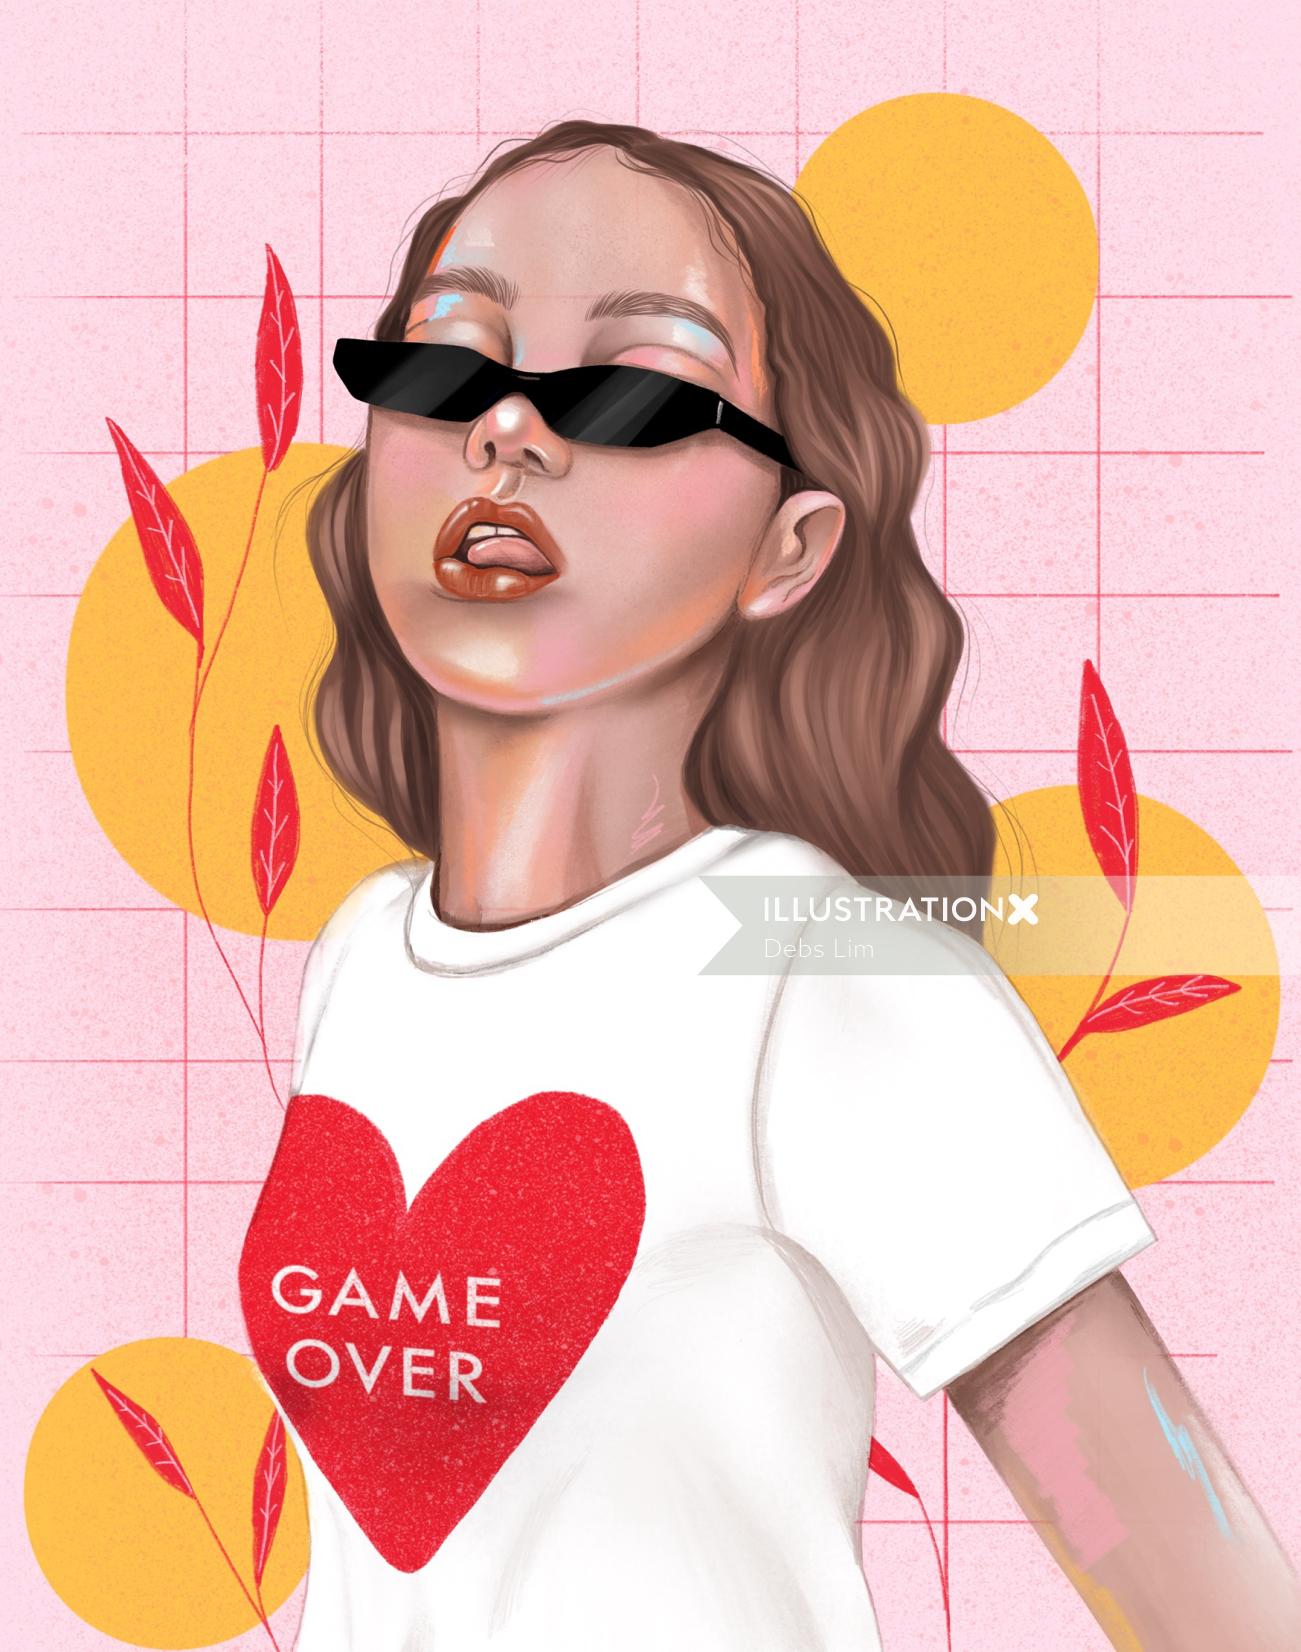 Game over t-shirt wearing woman portrait
